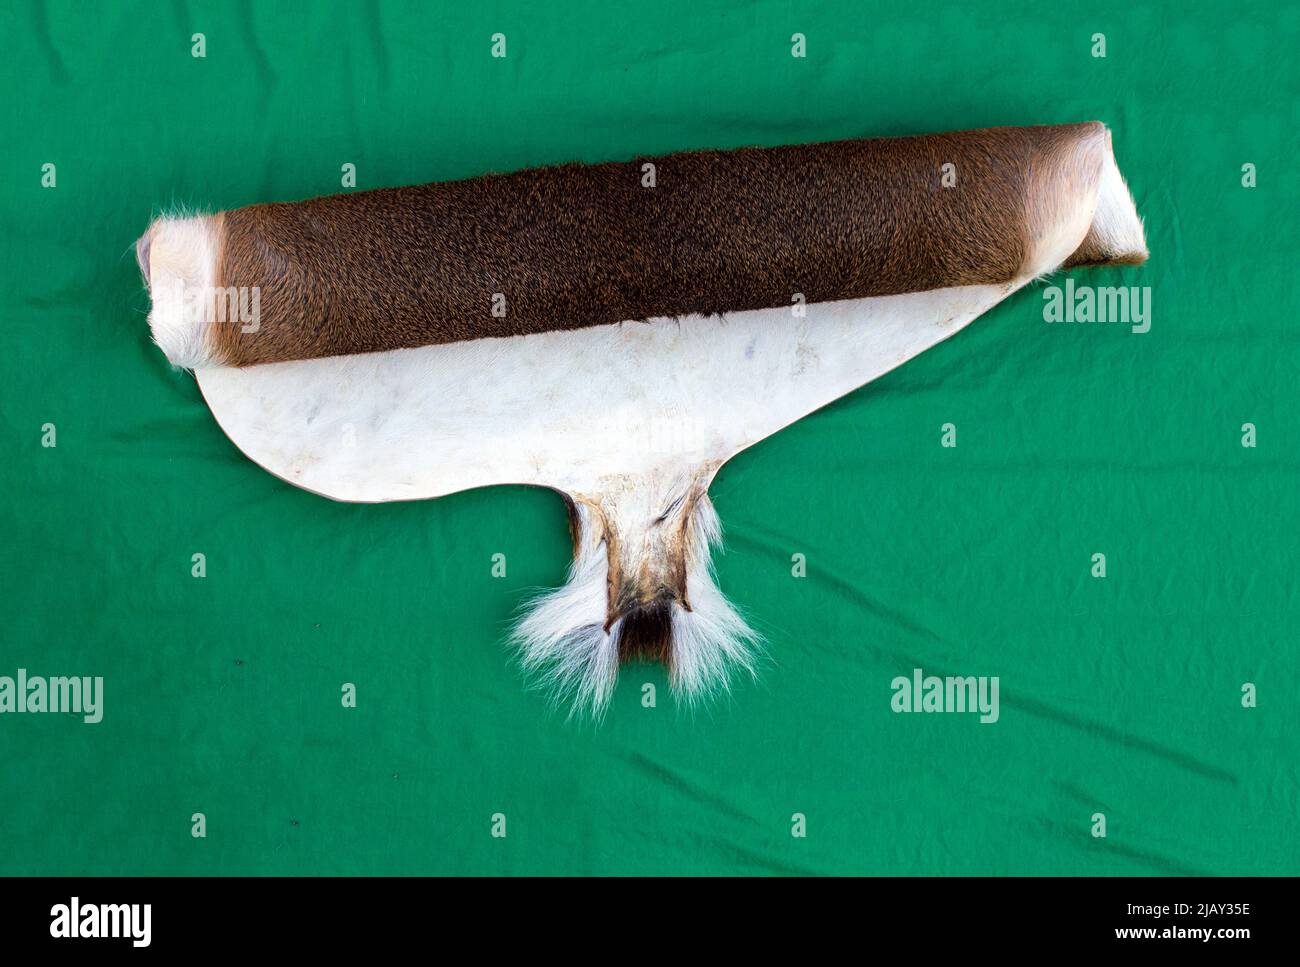 A rolled up deer tanned deer hide displays both the front hair side and the rough back side of the leather. The brown and white hide contrasts nicely Stock Photo